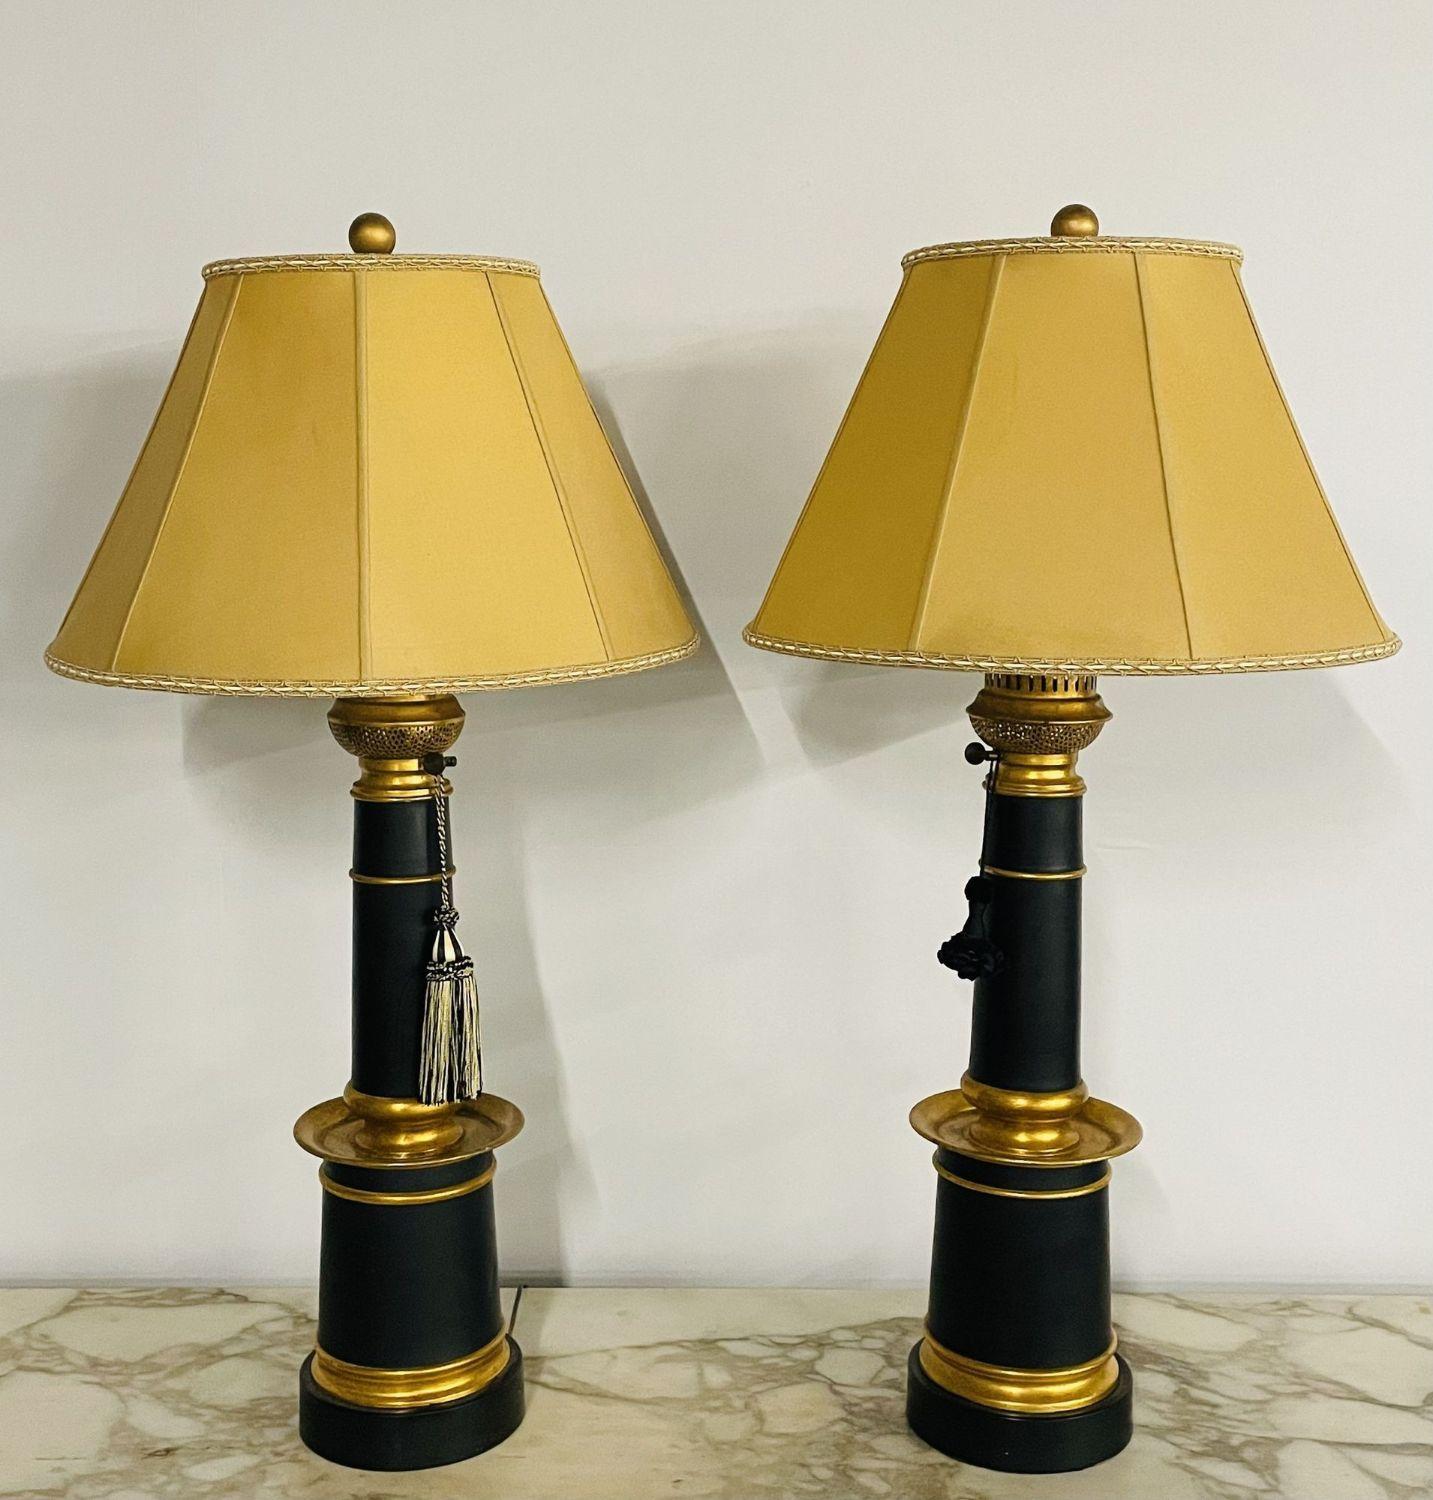 20th Century Pair of Hollywood Regency Style Table Lamps with Custom Shades, Ebony and Gilt For Sale